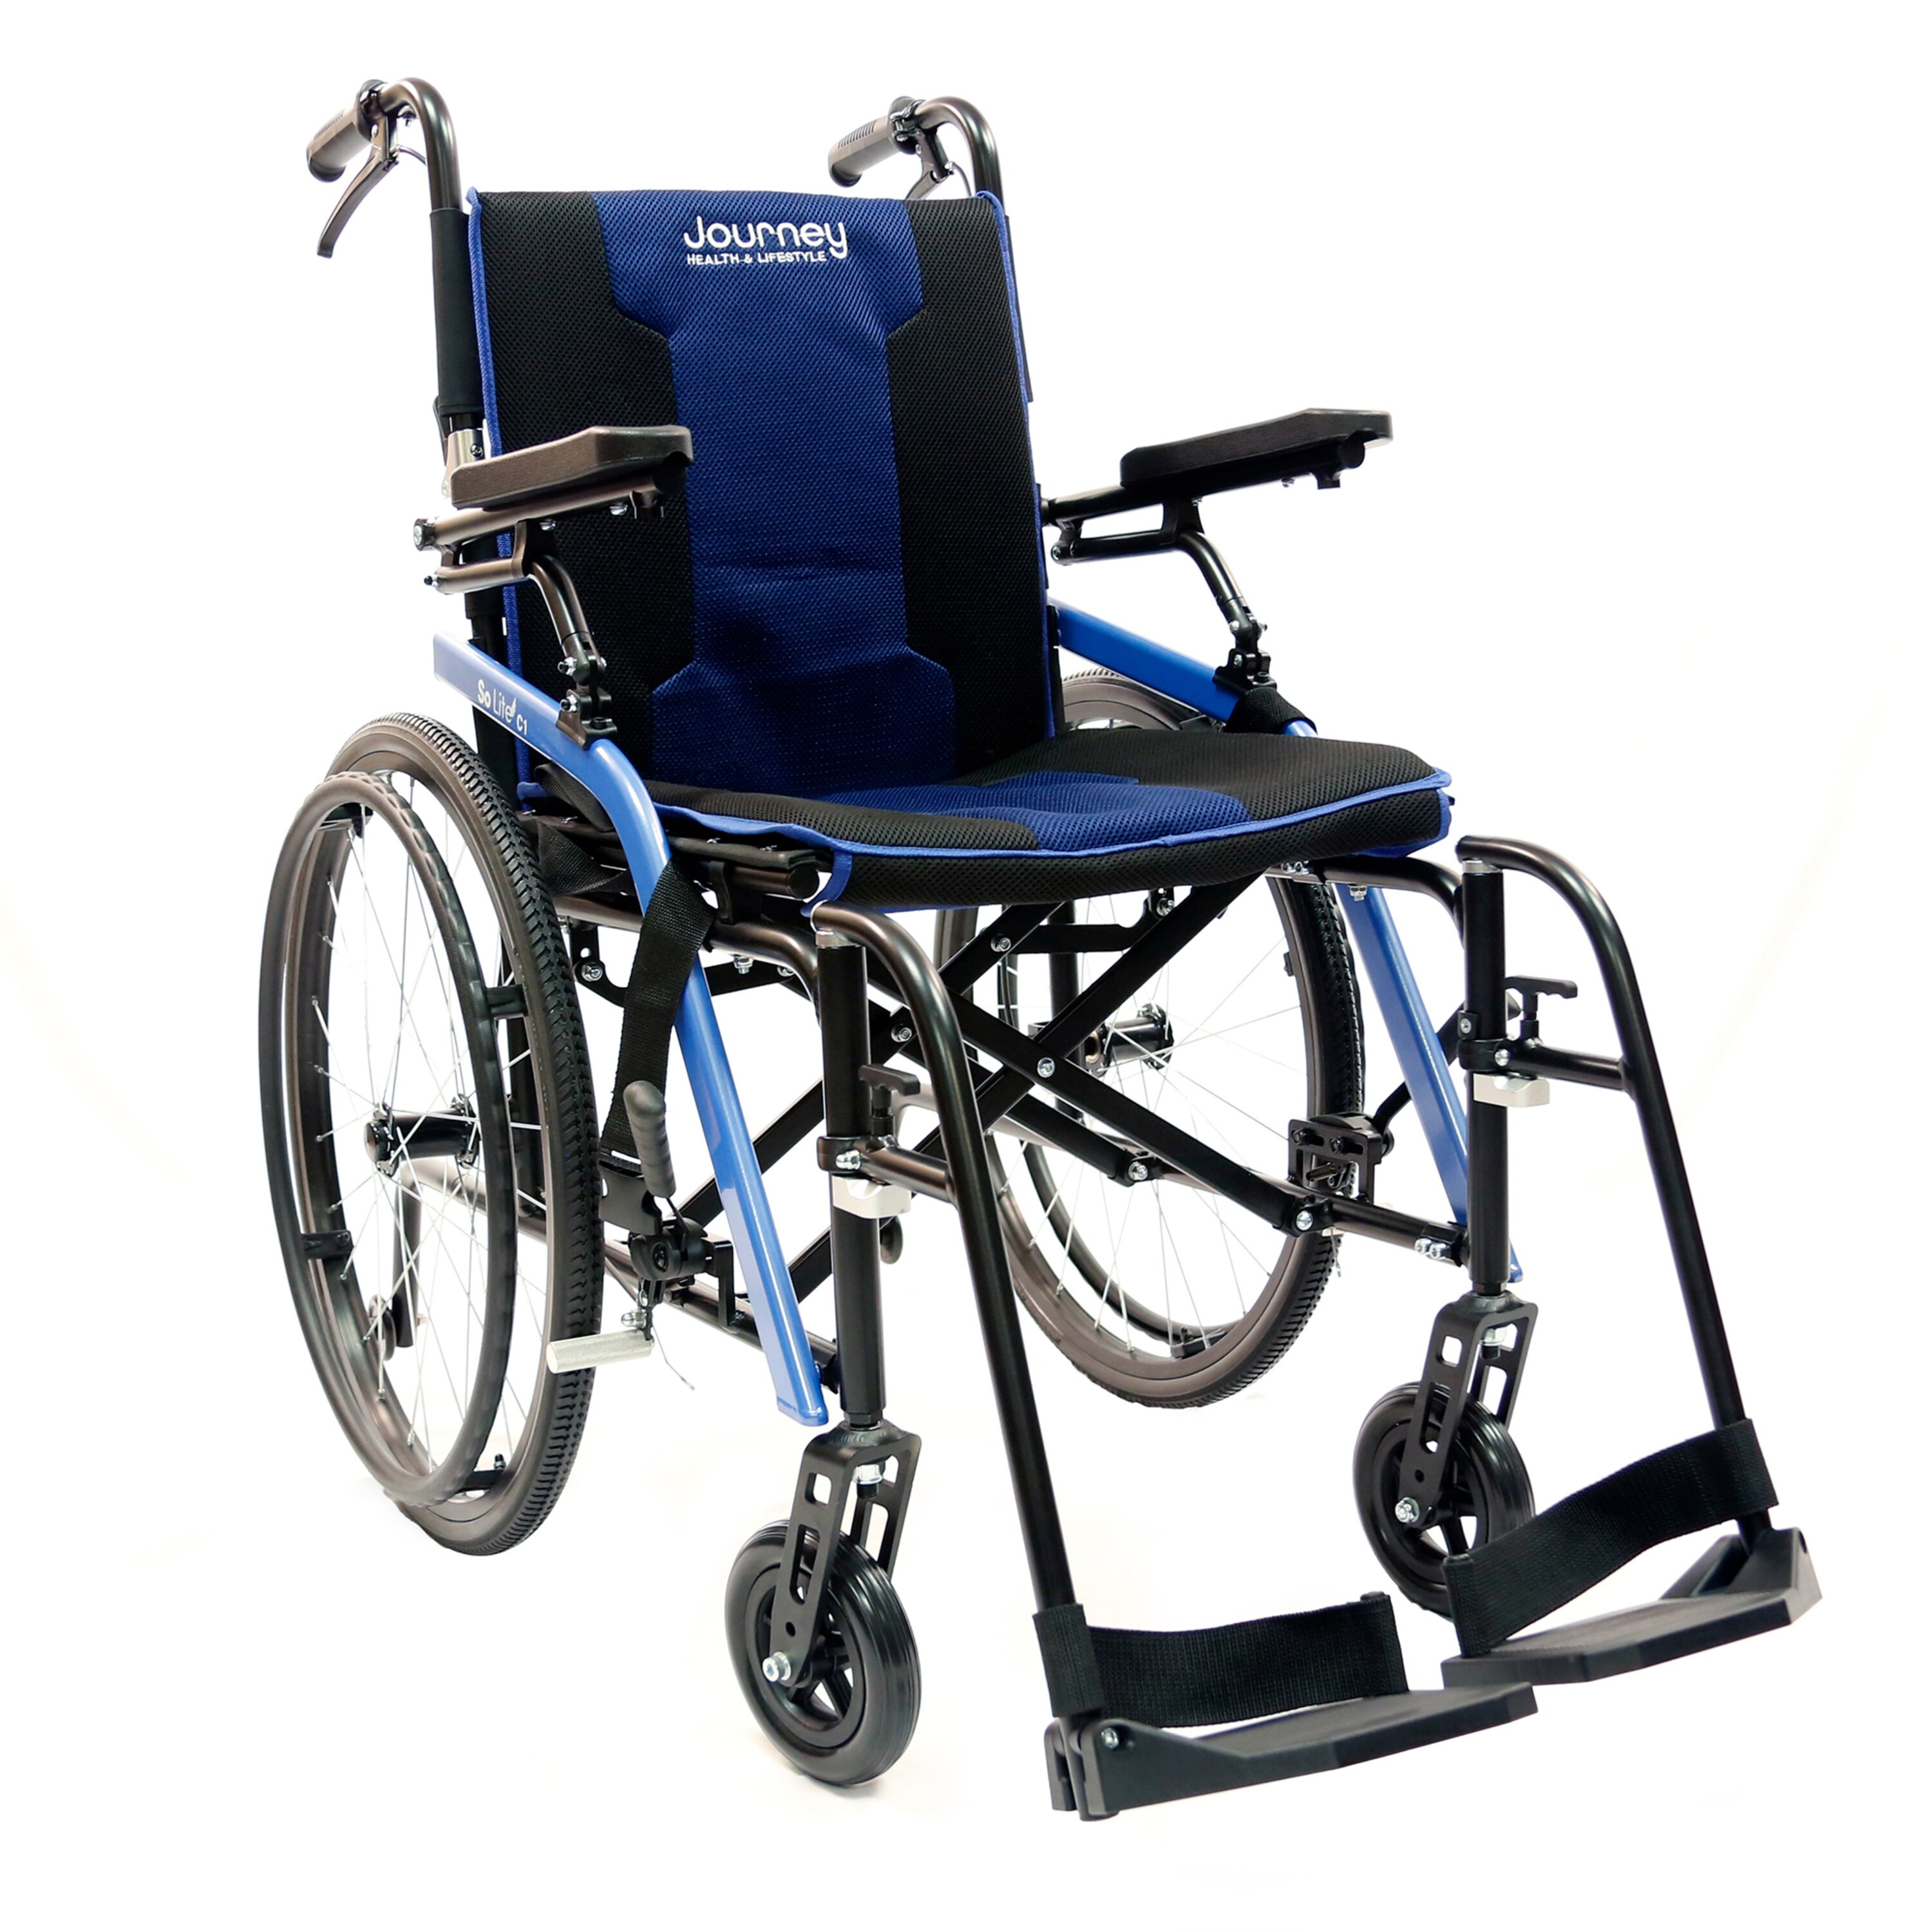 Journey Health and Lifestyle So Lite Folding Wheelchair with Padded Seat